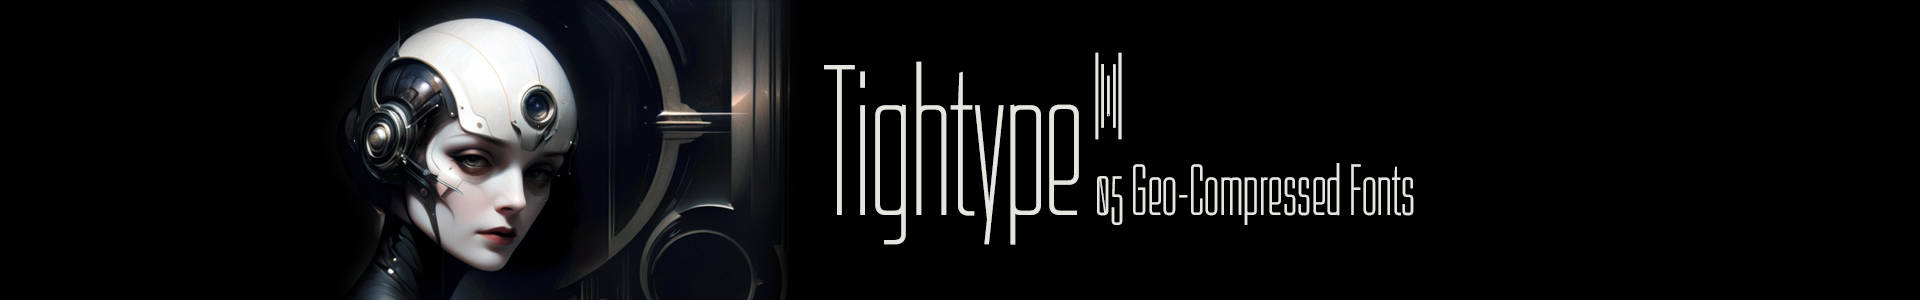 Tightype Geo-Compressed 05 font family